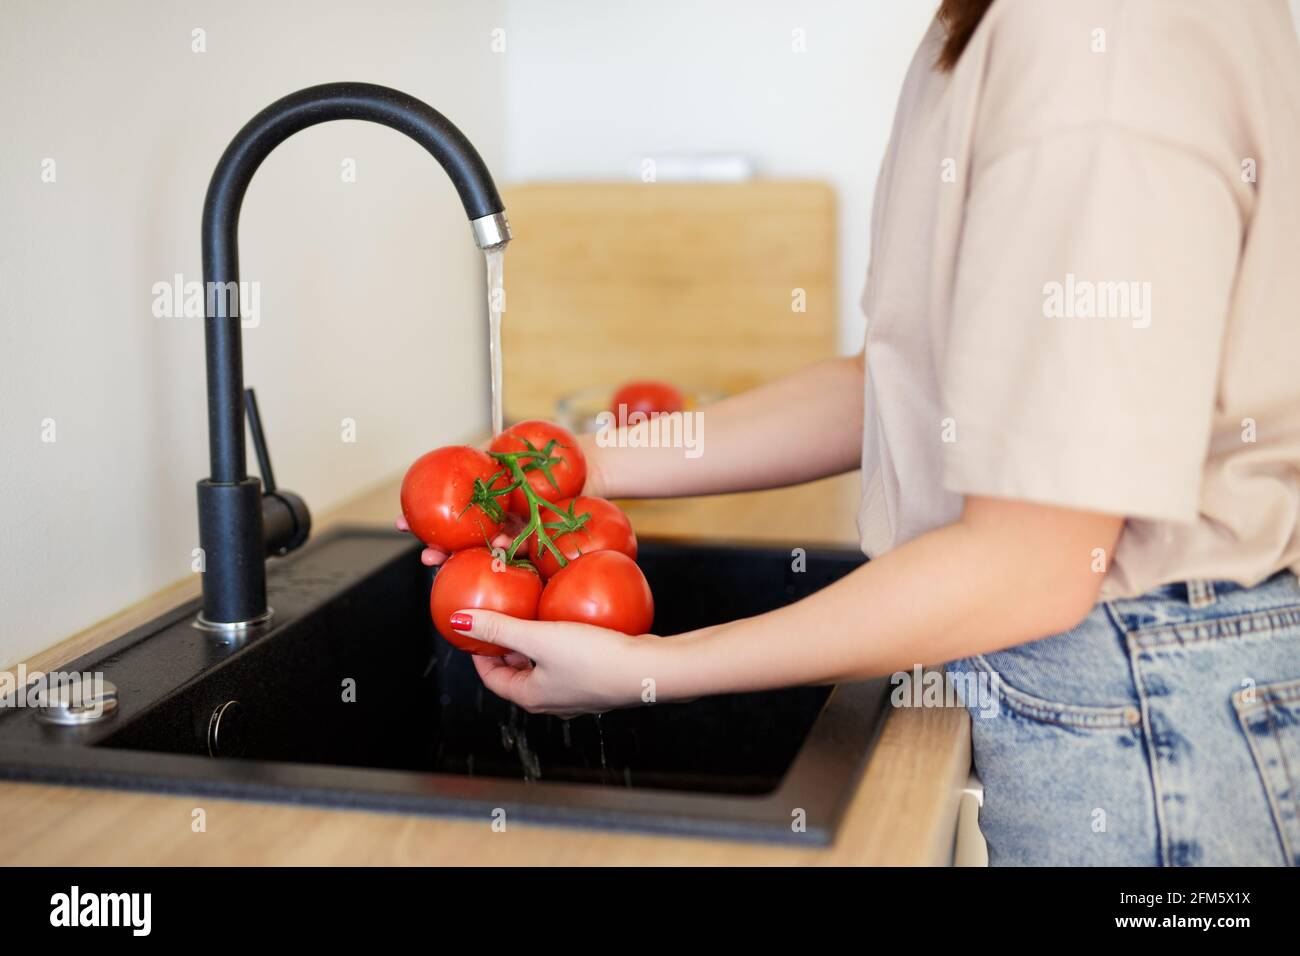 woman washing tomatoes under water before cooking Stock Photo